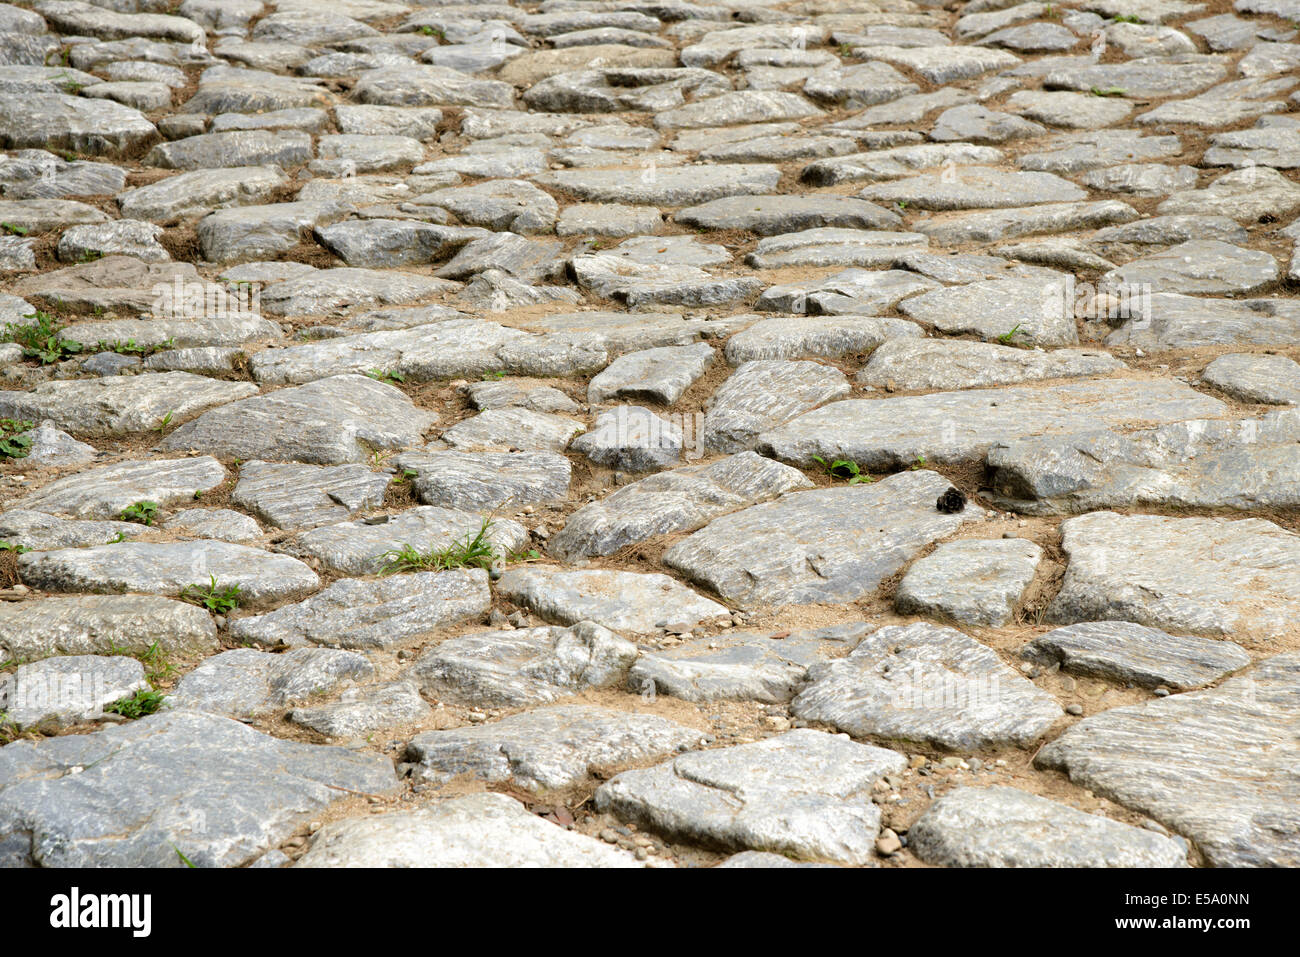 texture of old path paved with natural stones Stock Photo